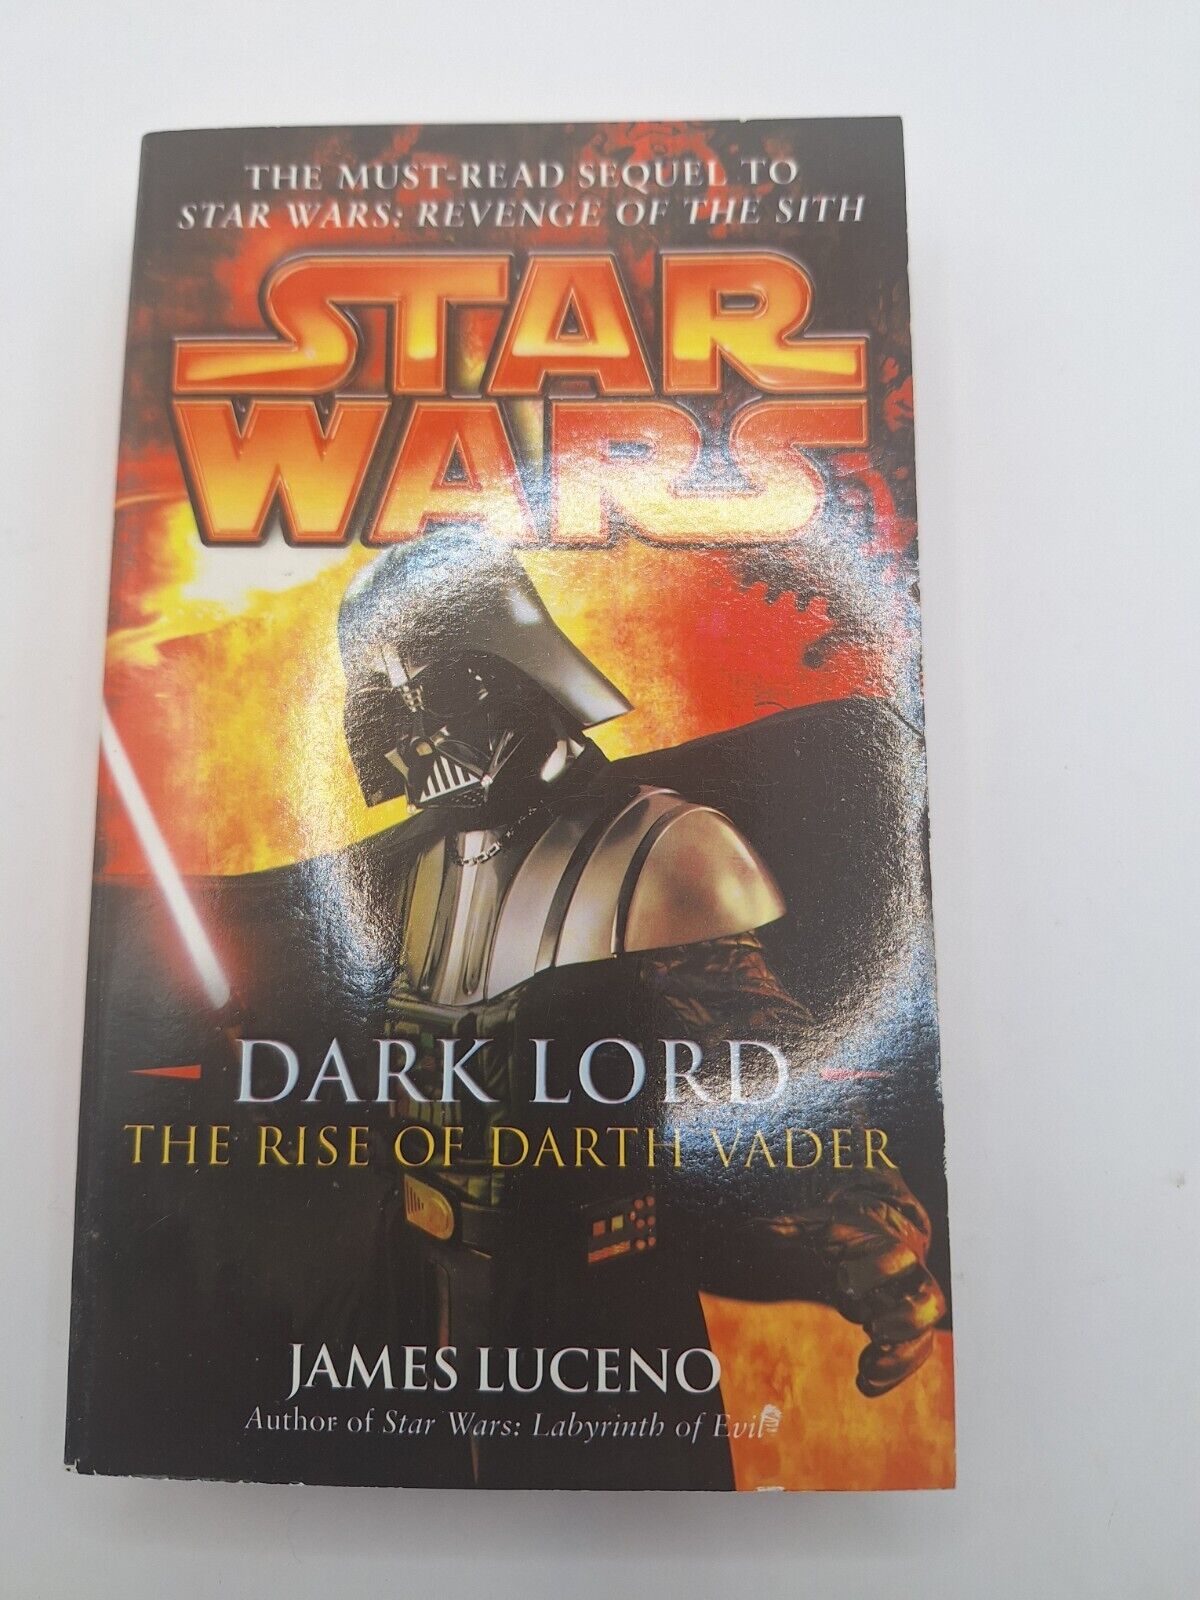 STAR WARS Dark Lord: The Rise of Darth Vader - James Luceno Paperback